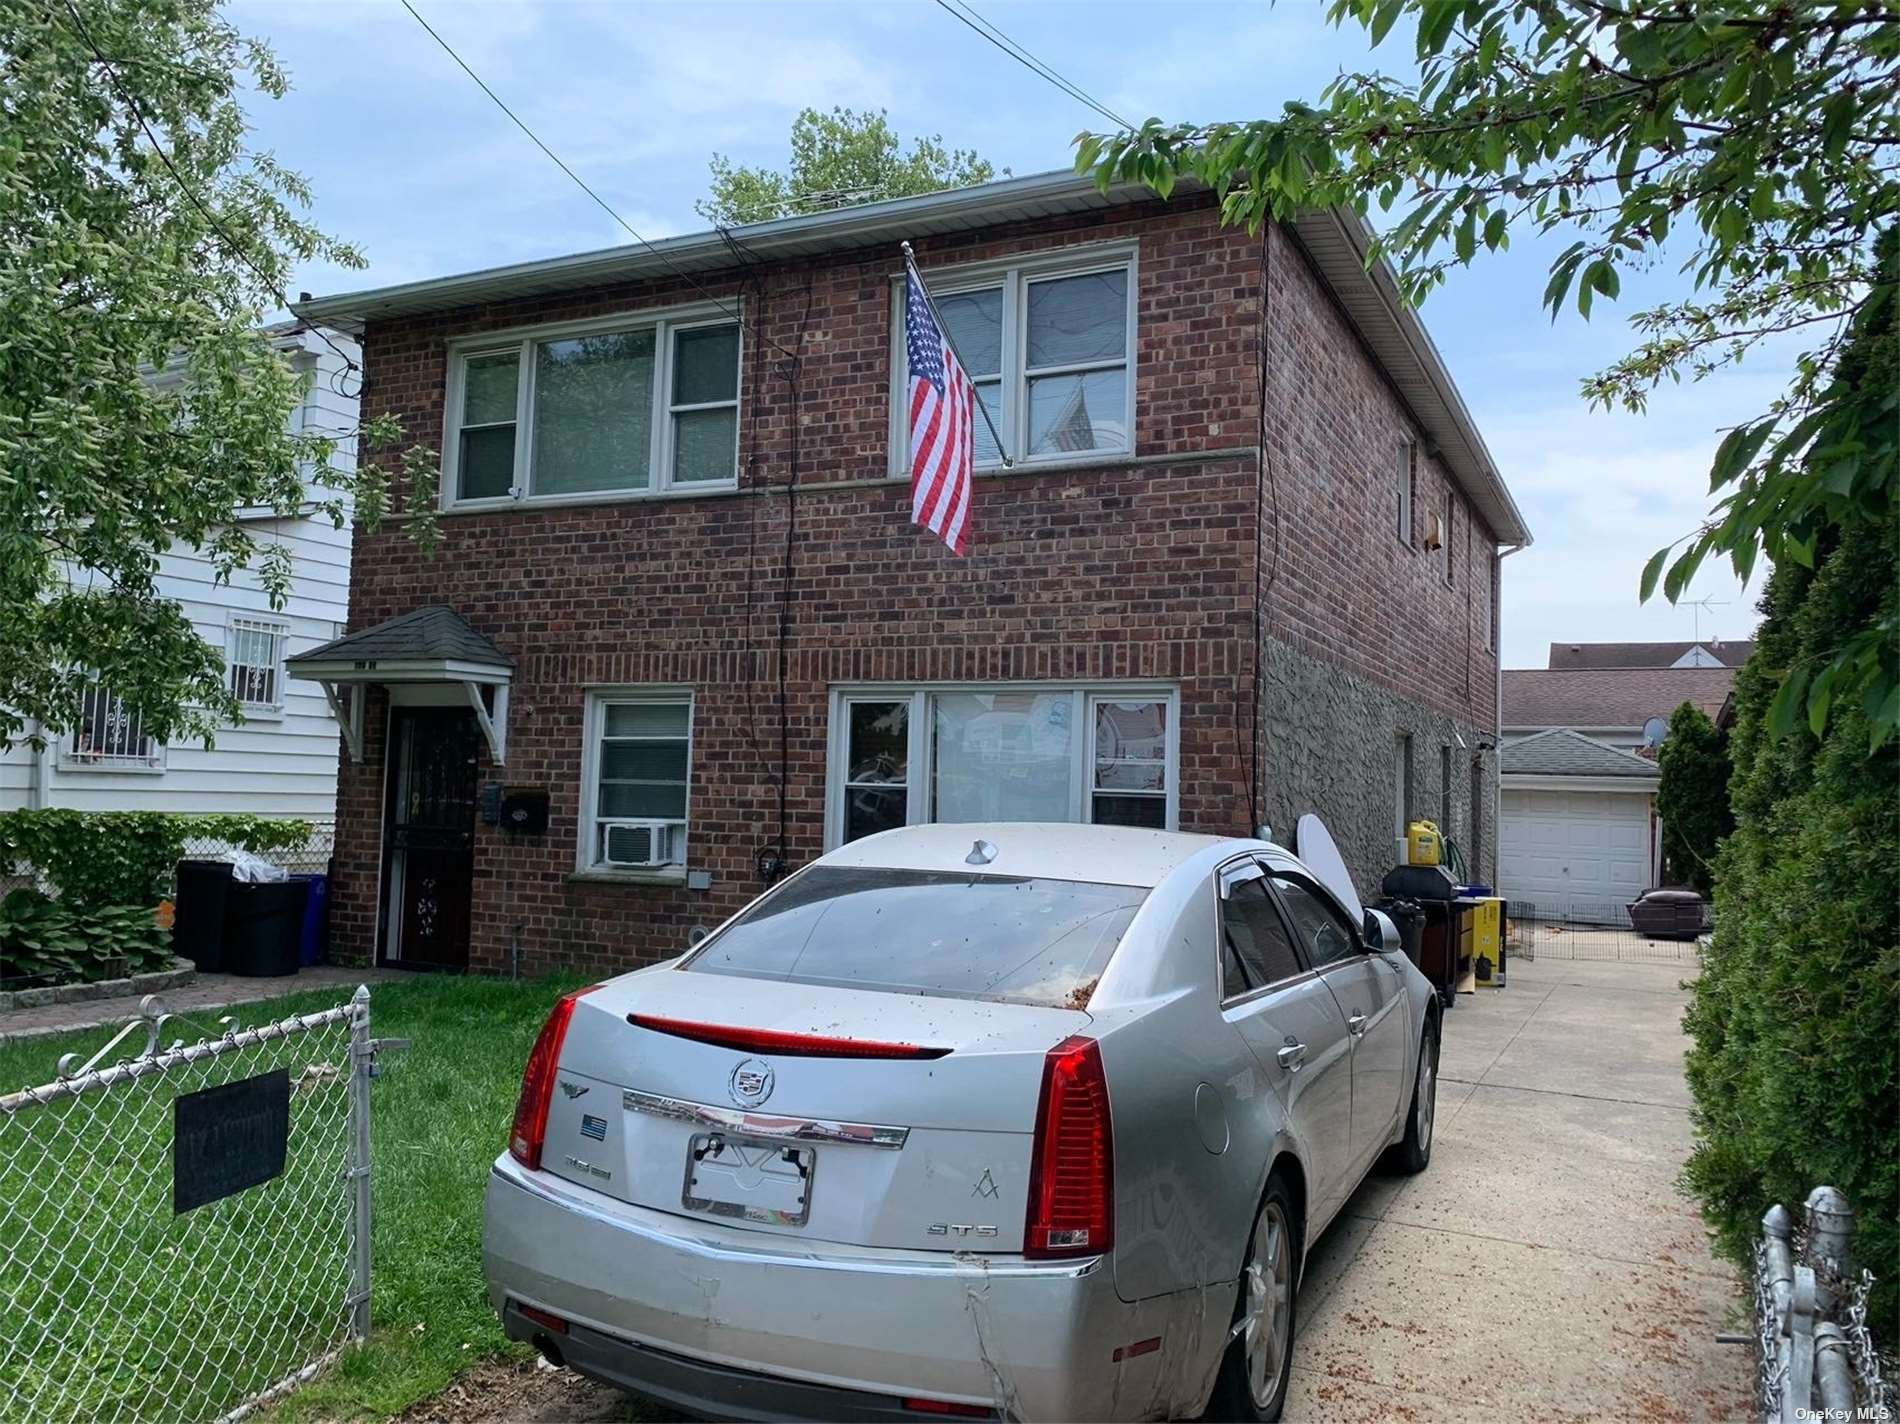 Two Family in Flushing - Bayside Ave  Queens, NY 11354